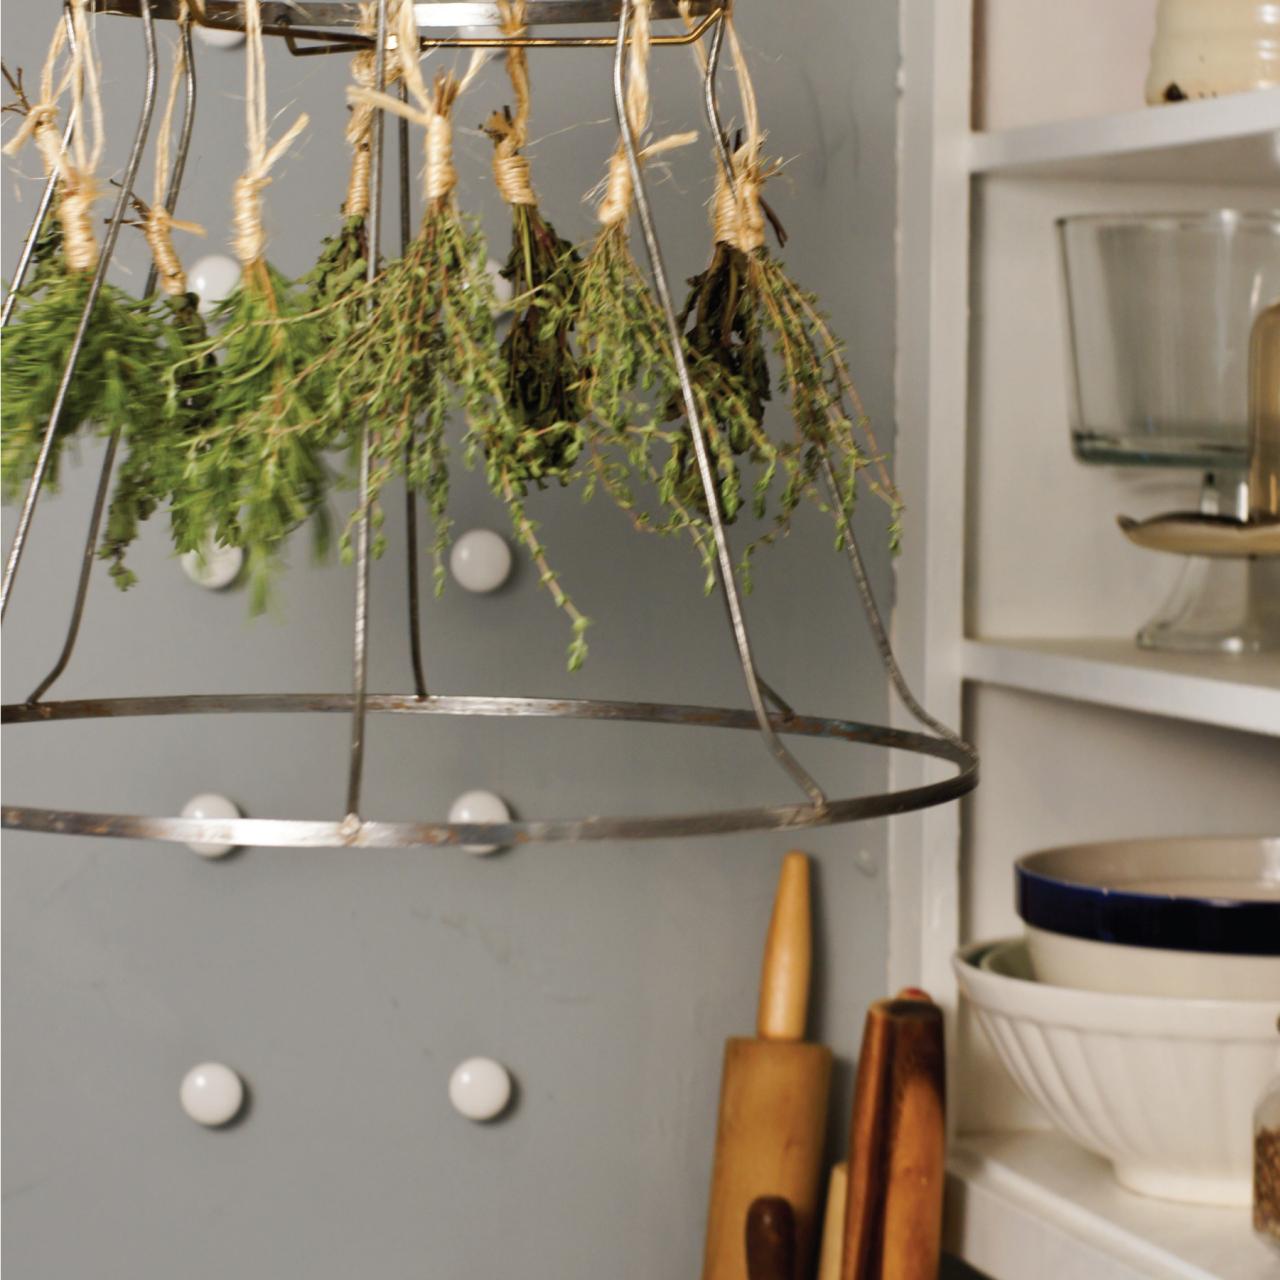 How to Make an Inexpensive Herb-Drying Rack